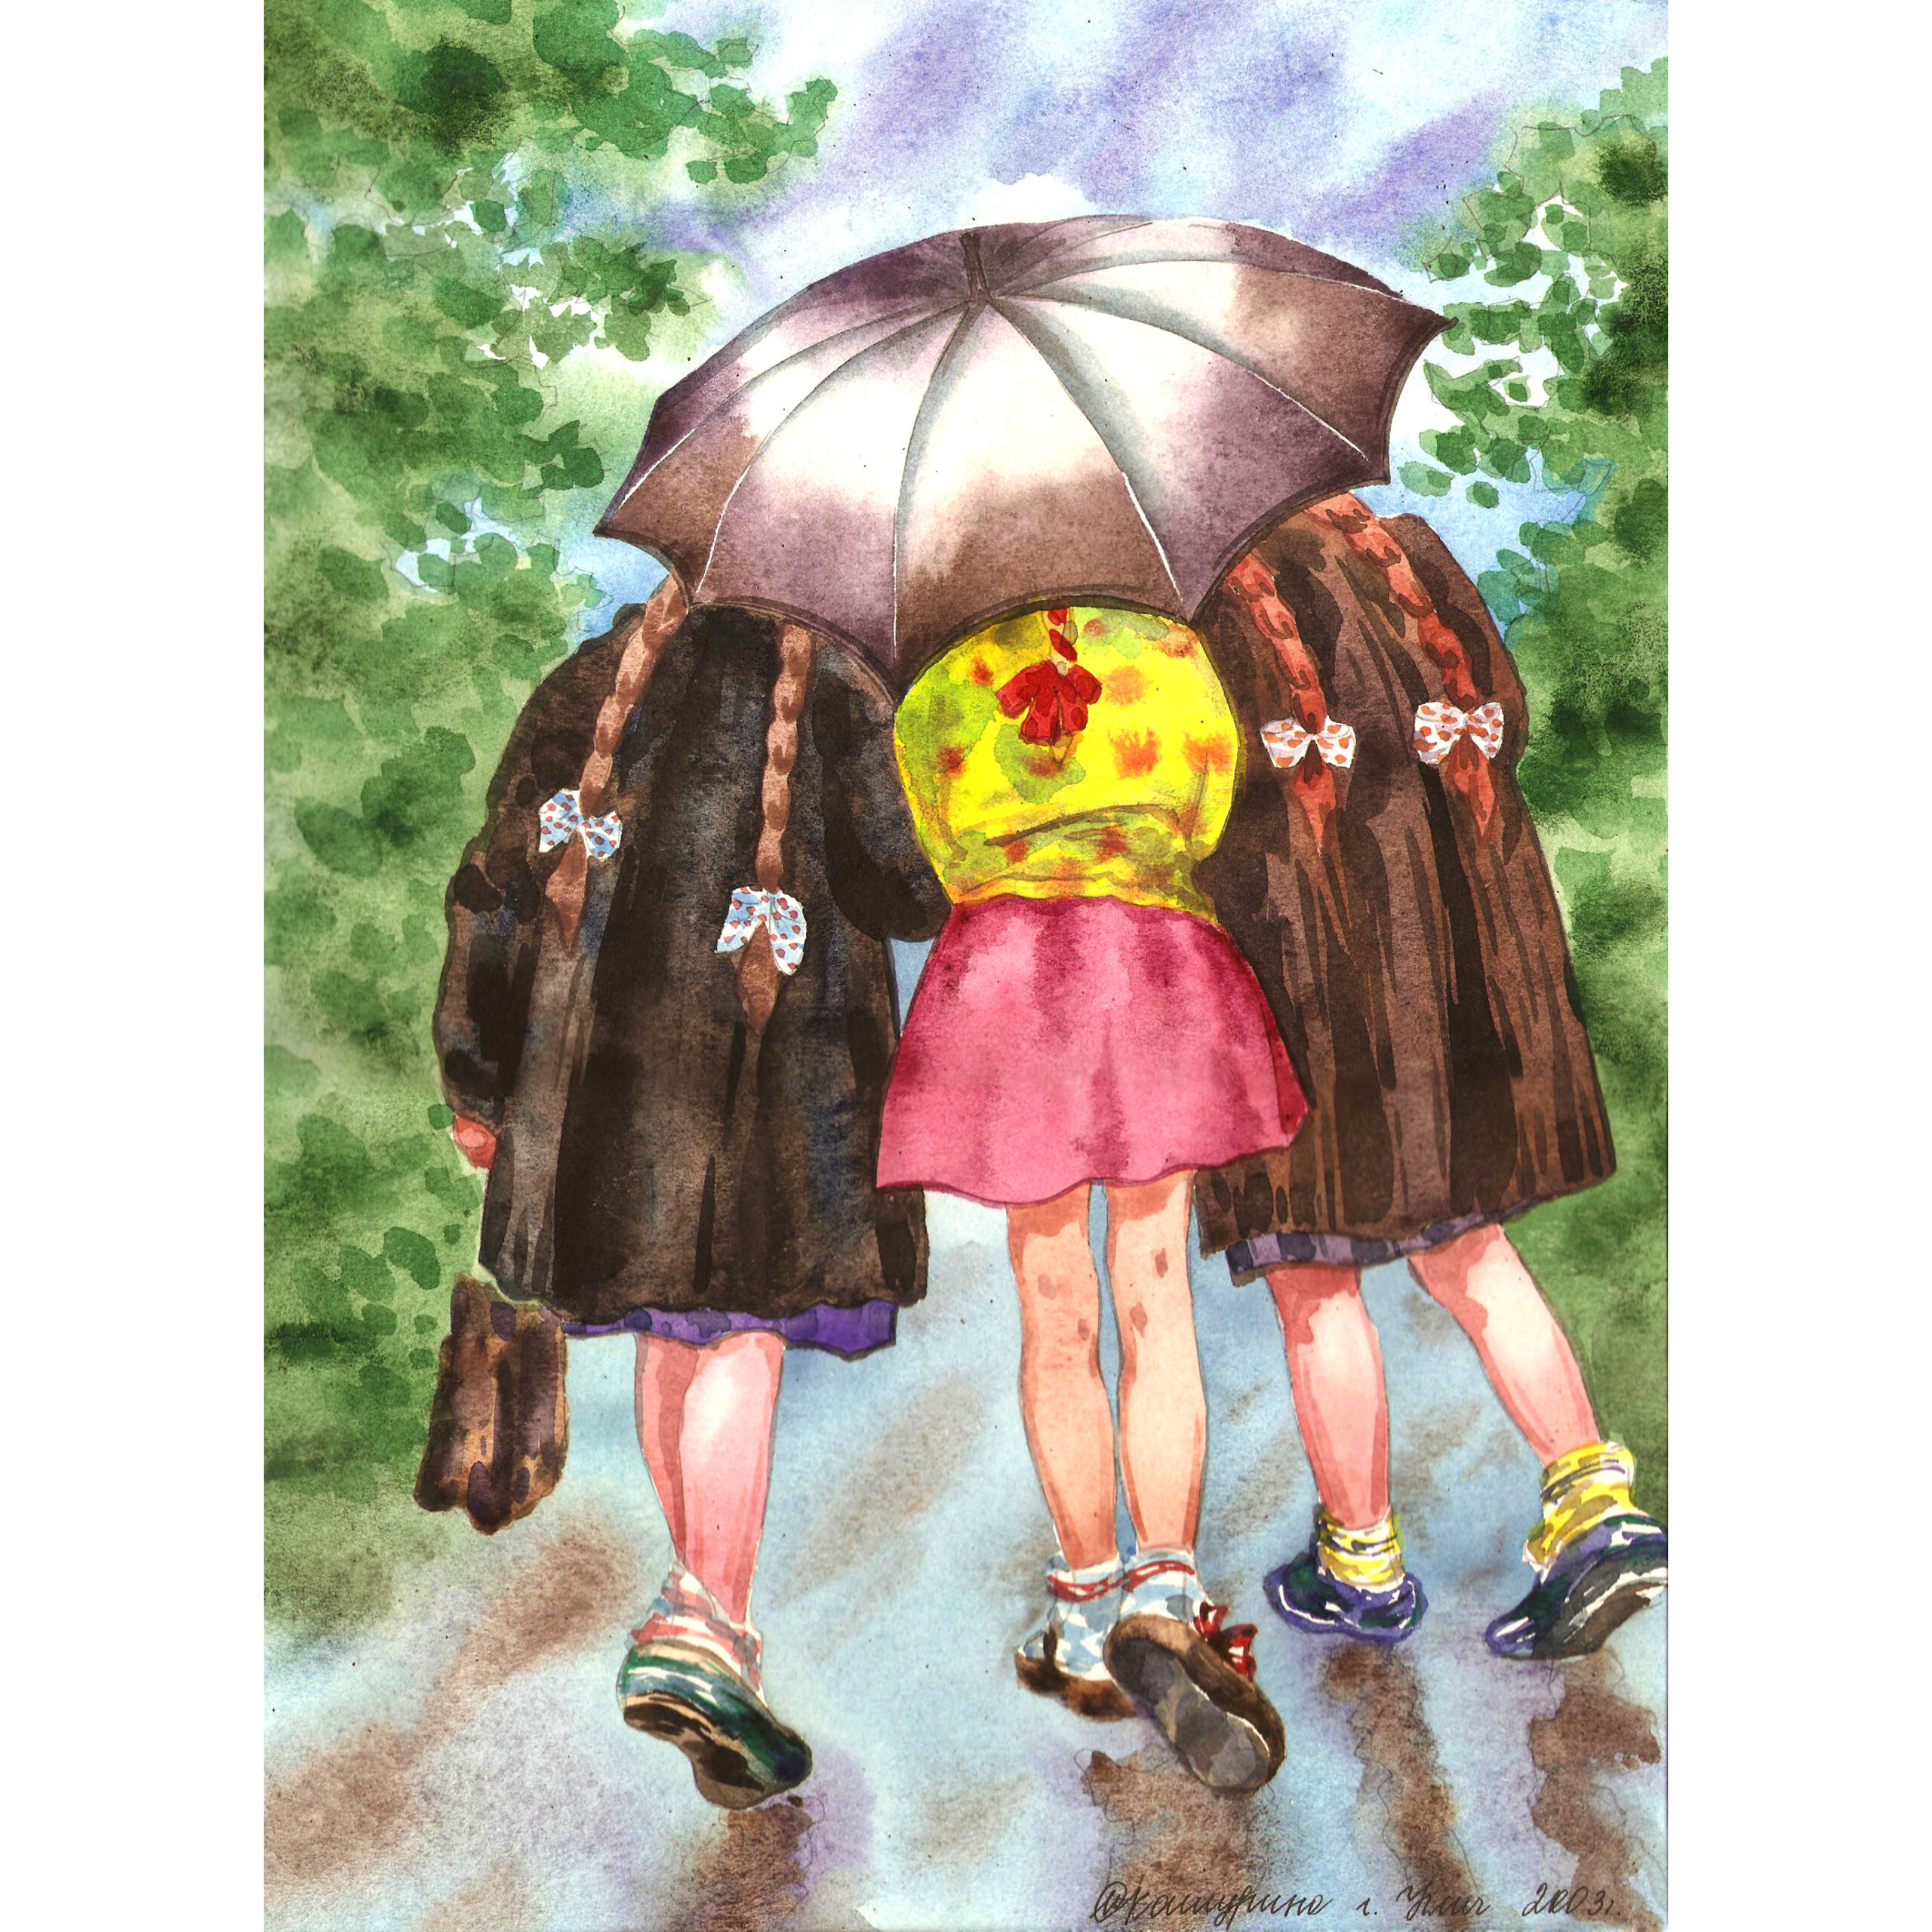 Girl With Umbrella in Rain Painting